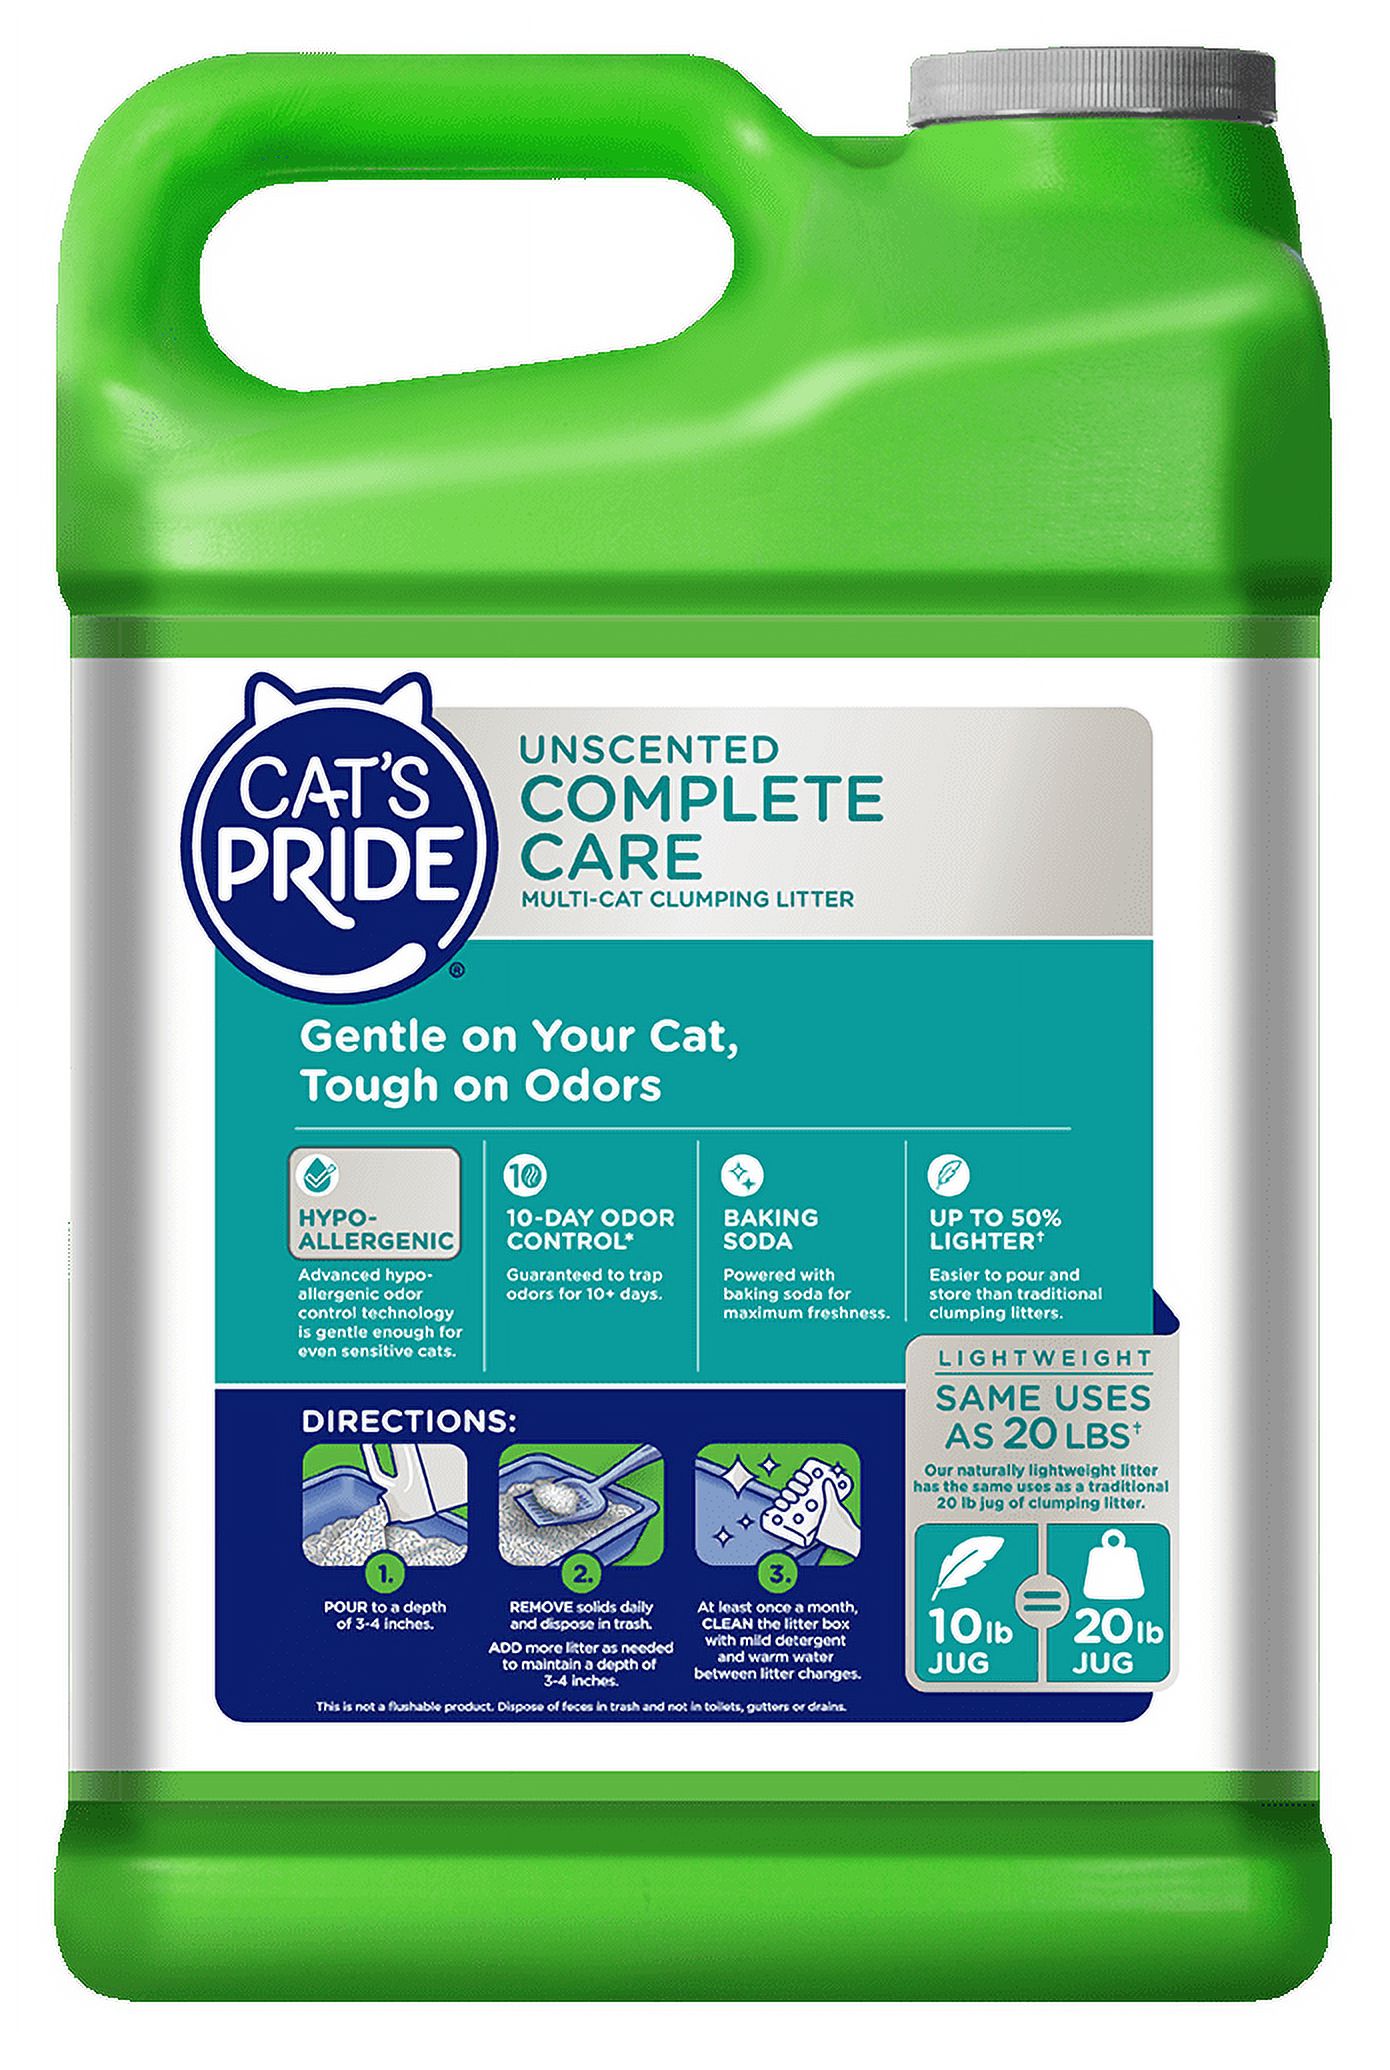 Cat's Pride Complete Care Unscented Hypoallergenic Multi-Cat Clumping Litter, 10 lb Jug - image 3 of 9